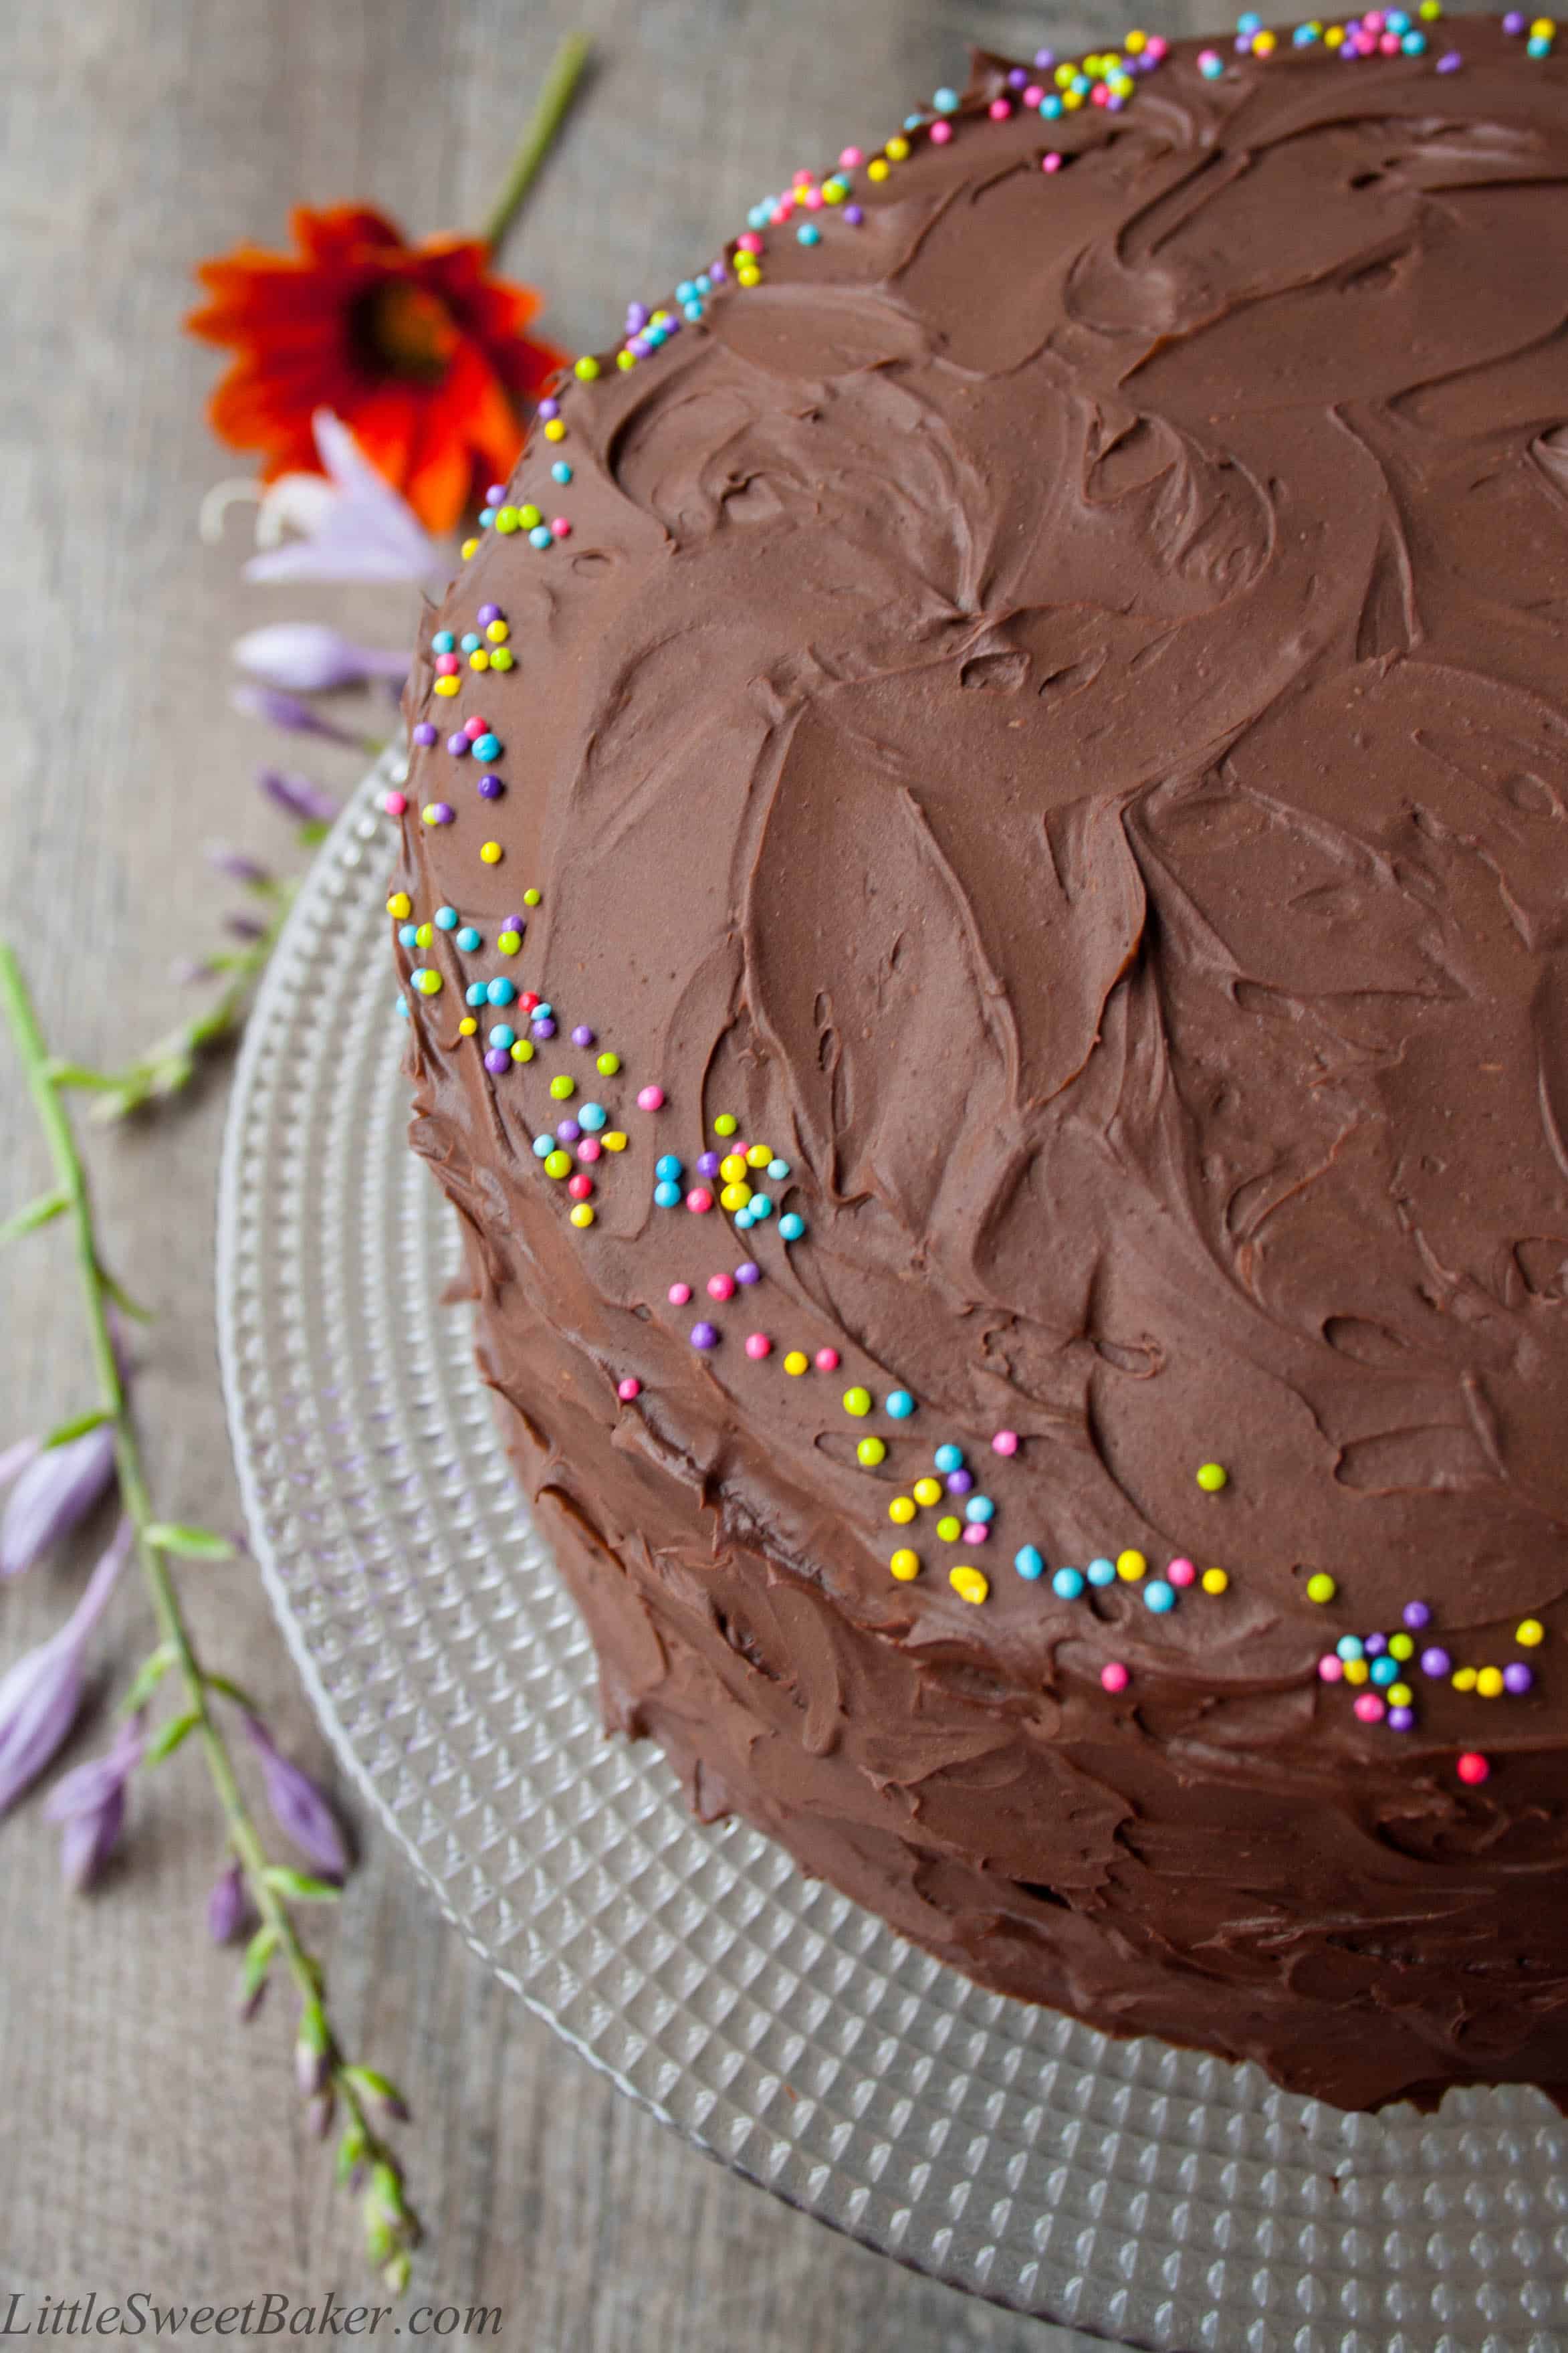 CHOCOLATE BIRTHDAY CAKE. A decadent 3-layer chocolate cake surrounded with the most luxurious rich chocolate frosting. Perfect for any occasion.